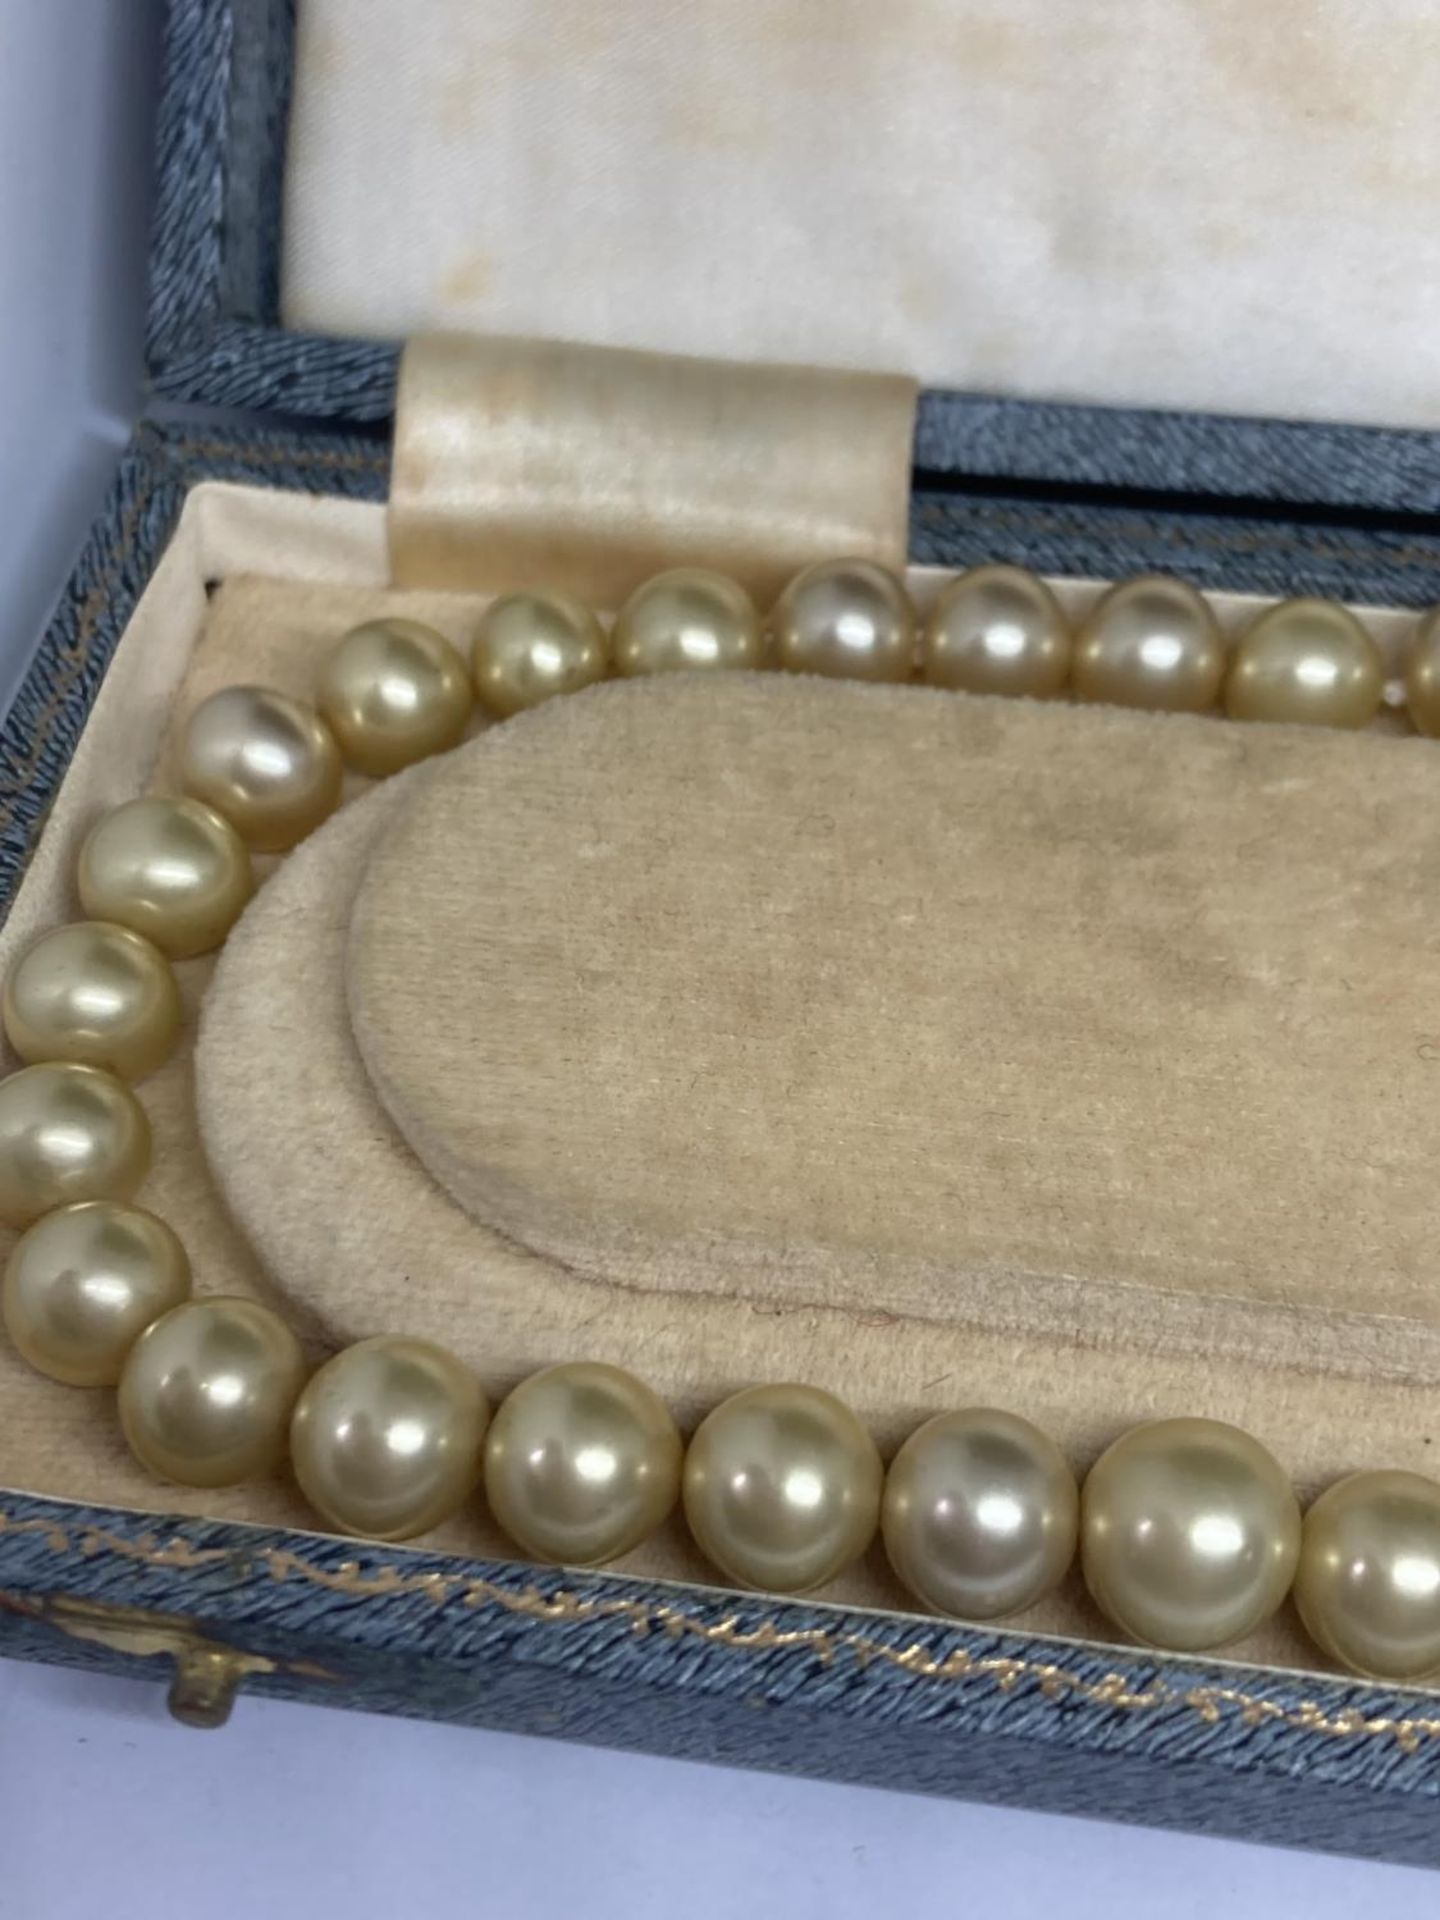 A PEARL NECKLACE IN A PRESENTATION BOX - Image 2 of 3